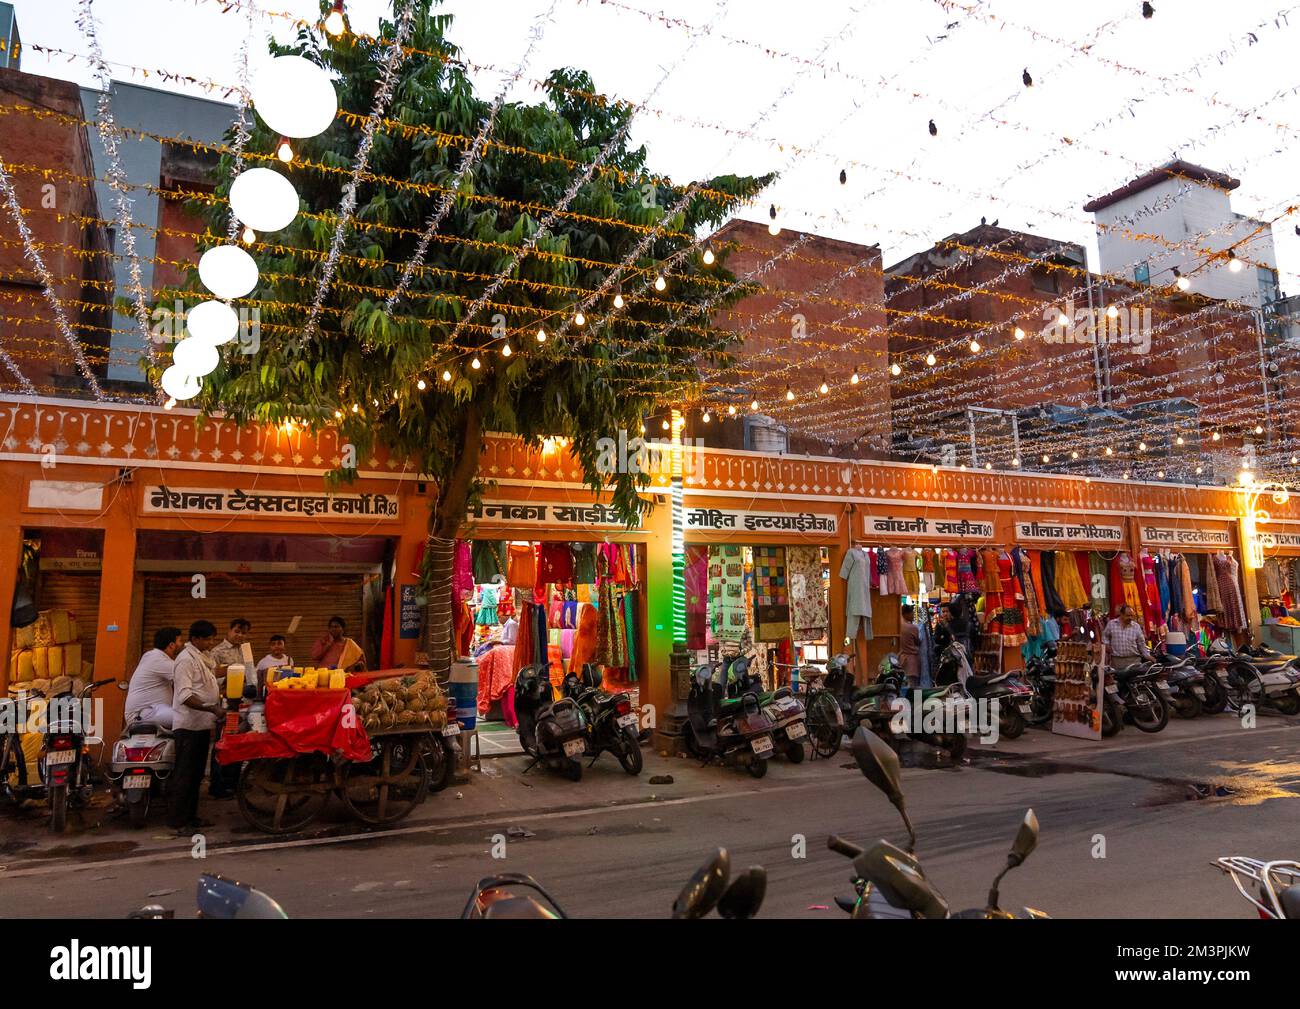 The town deocrated for Diwali festival, Rajasthan, Jaipur, India Stock Photo